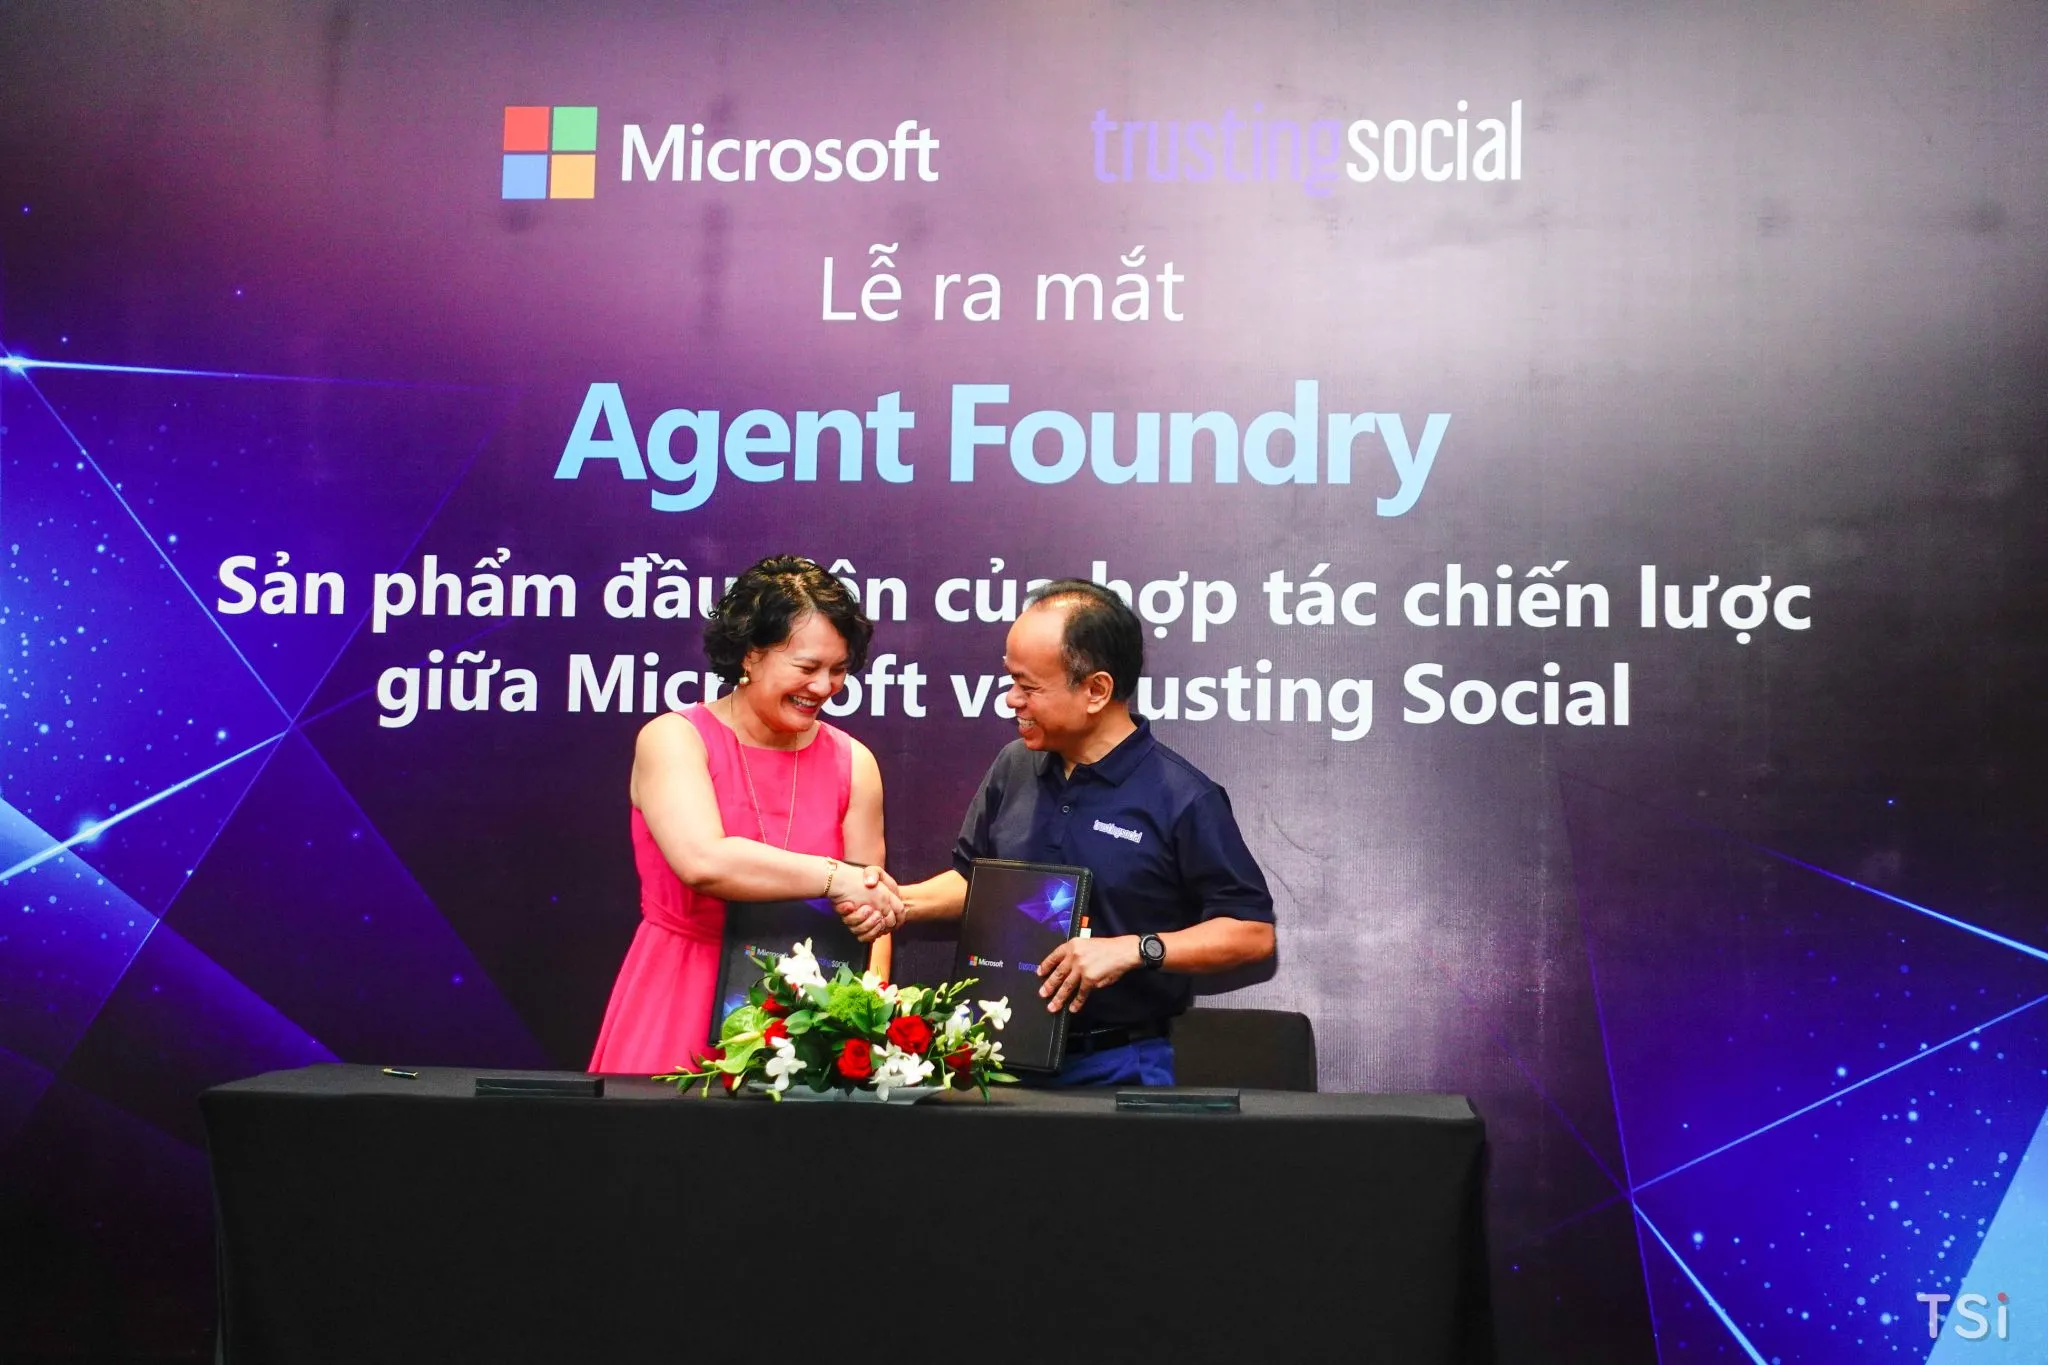 Trusting Social brings AI-powered agents to enterprises, backed by Microsoft Cloud and AI technologies